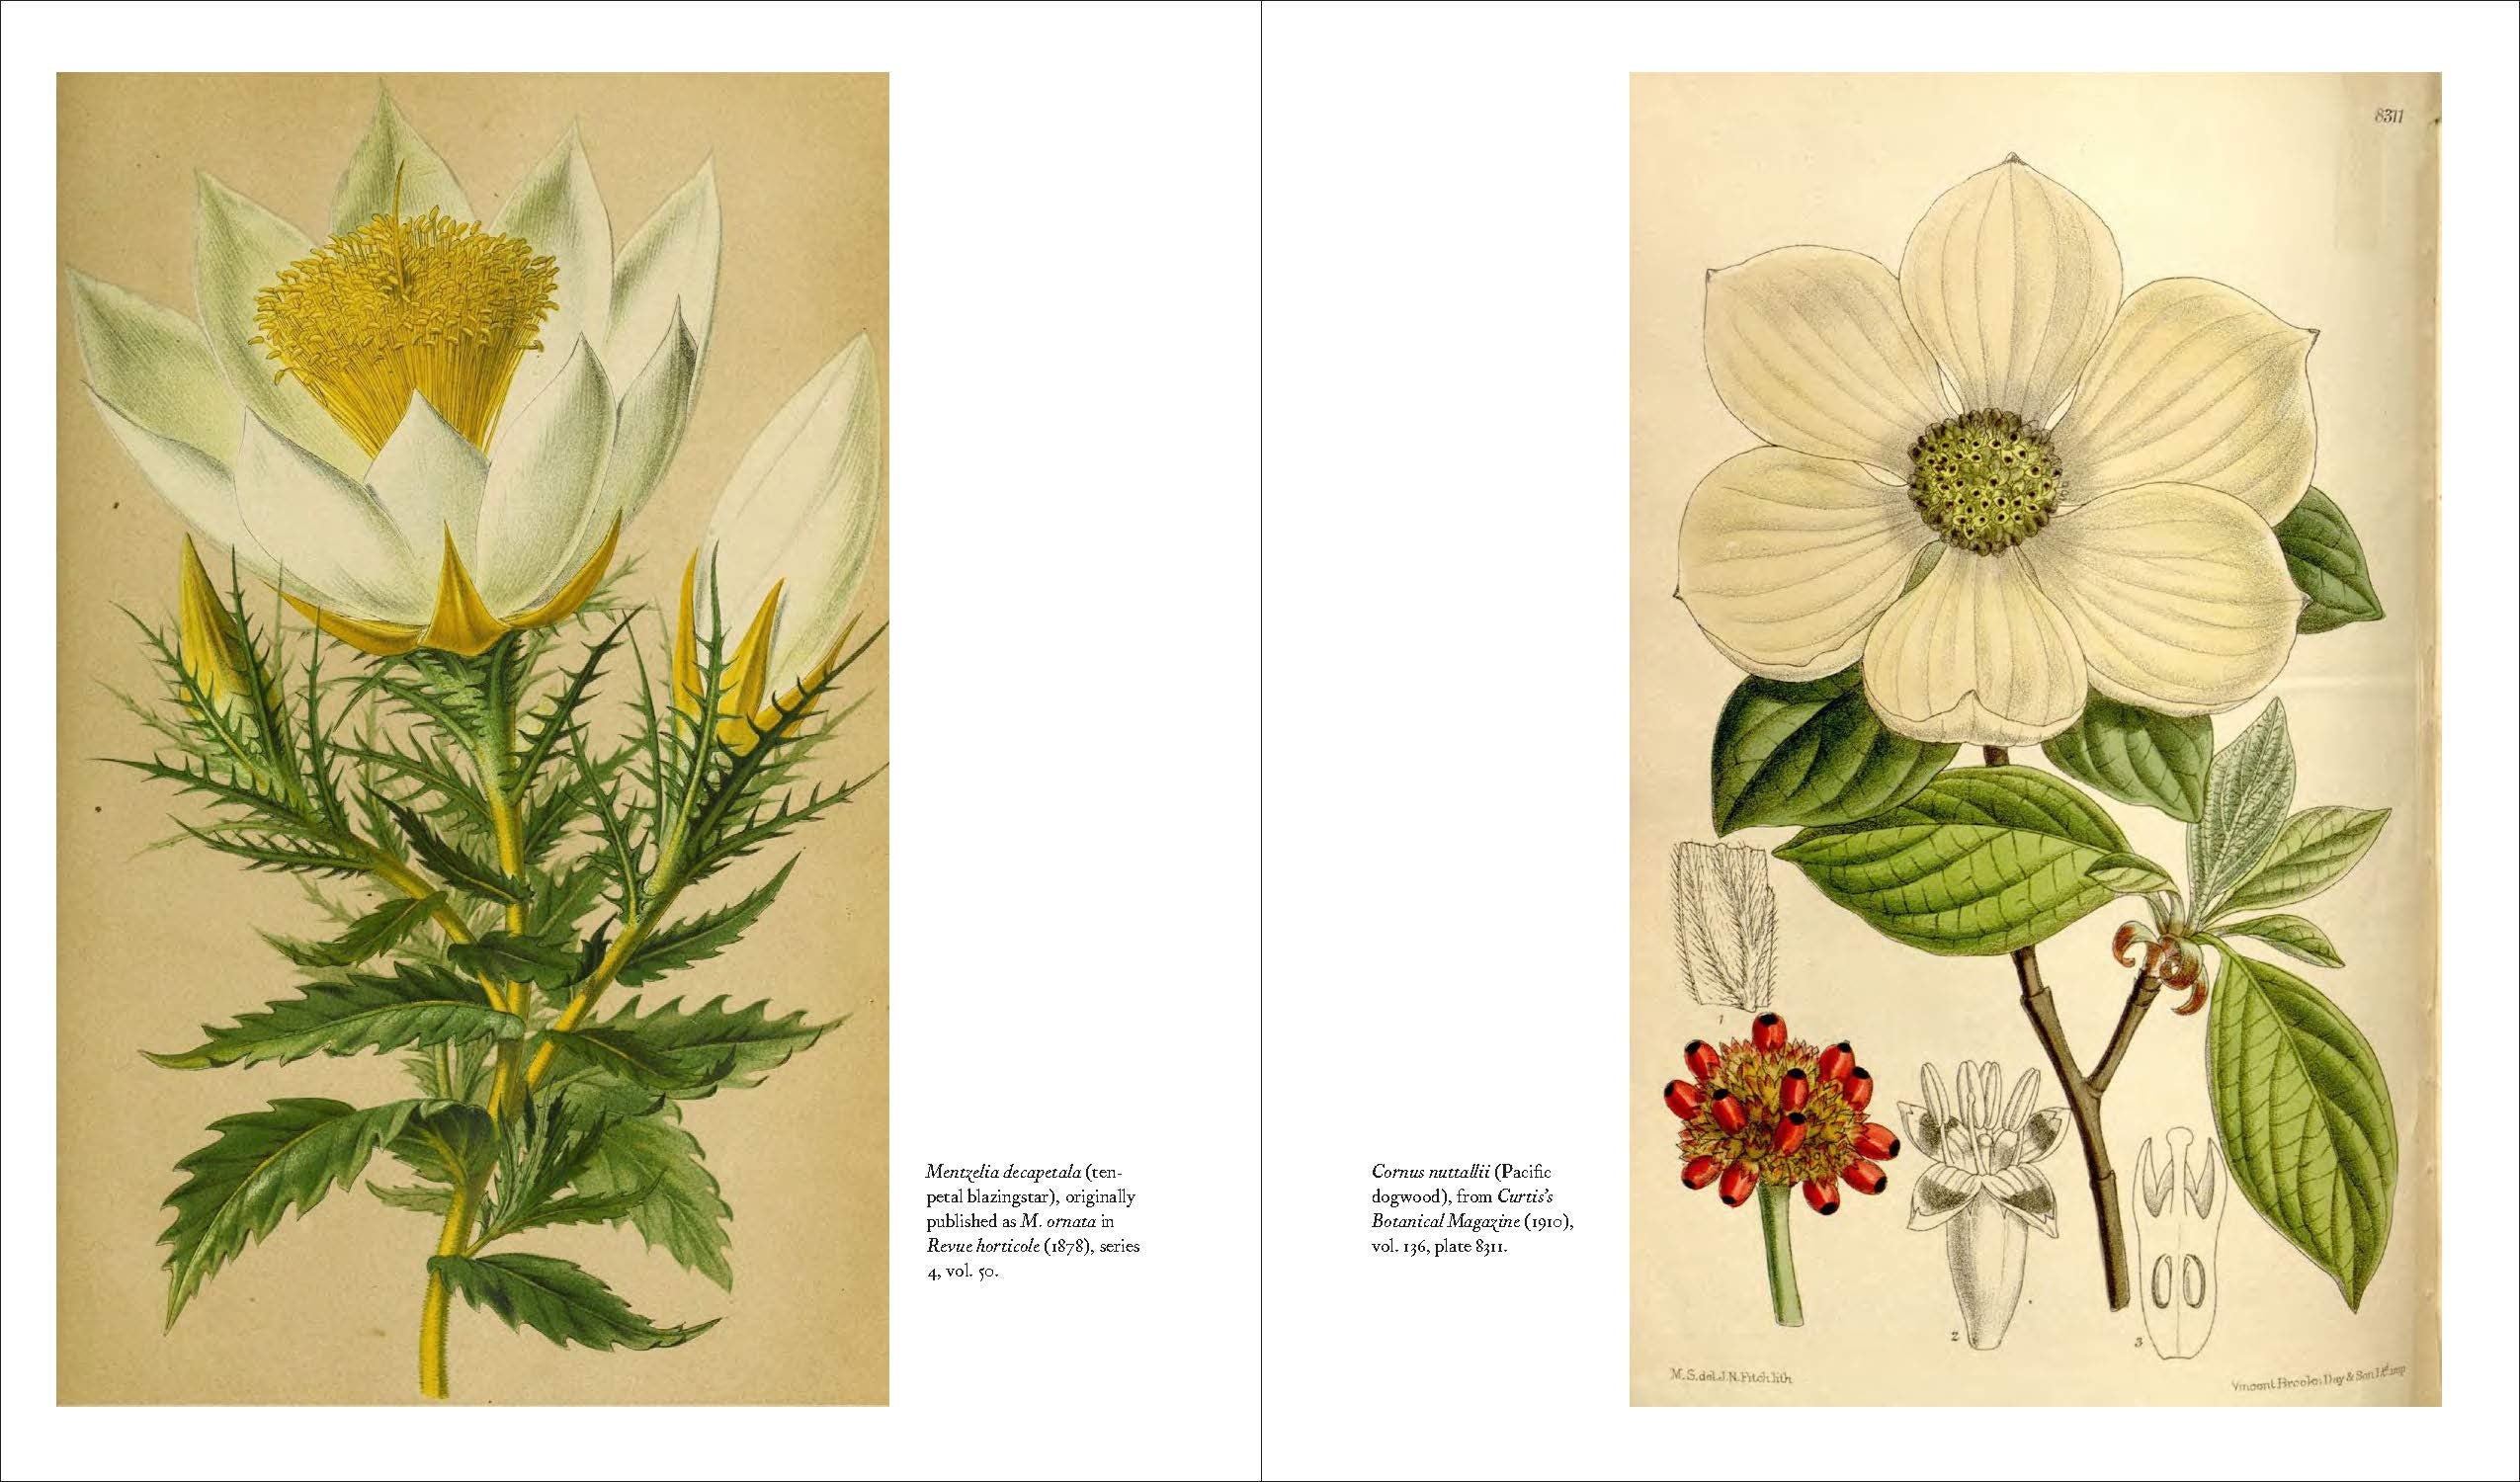 Herbarium - The Quest to Preserve & Classify the World's Plants